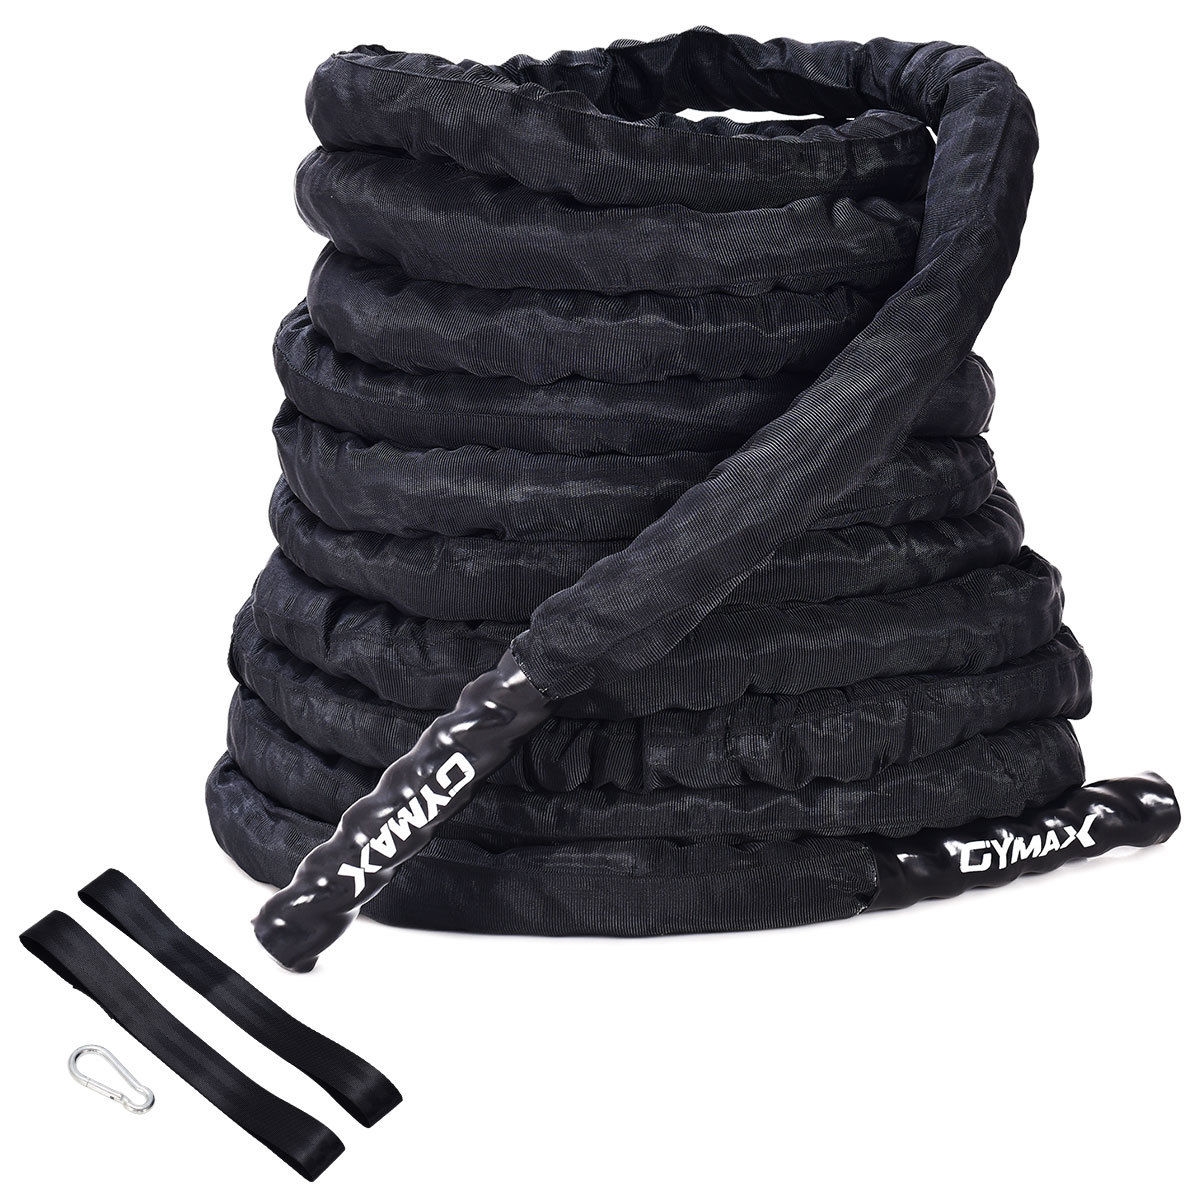 This battle ropes are great conditioning tool that will sculpt your entire body. This battle rope will increase muscular endurance and cardiovascular conditioning which is important for your health. The design of durable cover handle will improve the grip of this combat rope then you can use it easier. The shorter workout rope is great for those new at rope training, the longer one is better fit the intermediates and pros. According to your actual needs you can buy the most suitable battle rope for your training. This battle rope can be used at home, in gym or any wide-open area you wanted. Extremely easy to install-just wrap it around something and get to work! If you are looking for battle ropes, please don't hesitate to buy one! Made of highly durable poly dacron which is wear-resistant to prevent fraying even when used outdoors Covered with the tubular nylon sleeves to protect the rope from friction damage Heat shrink grips for impro